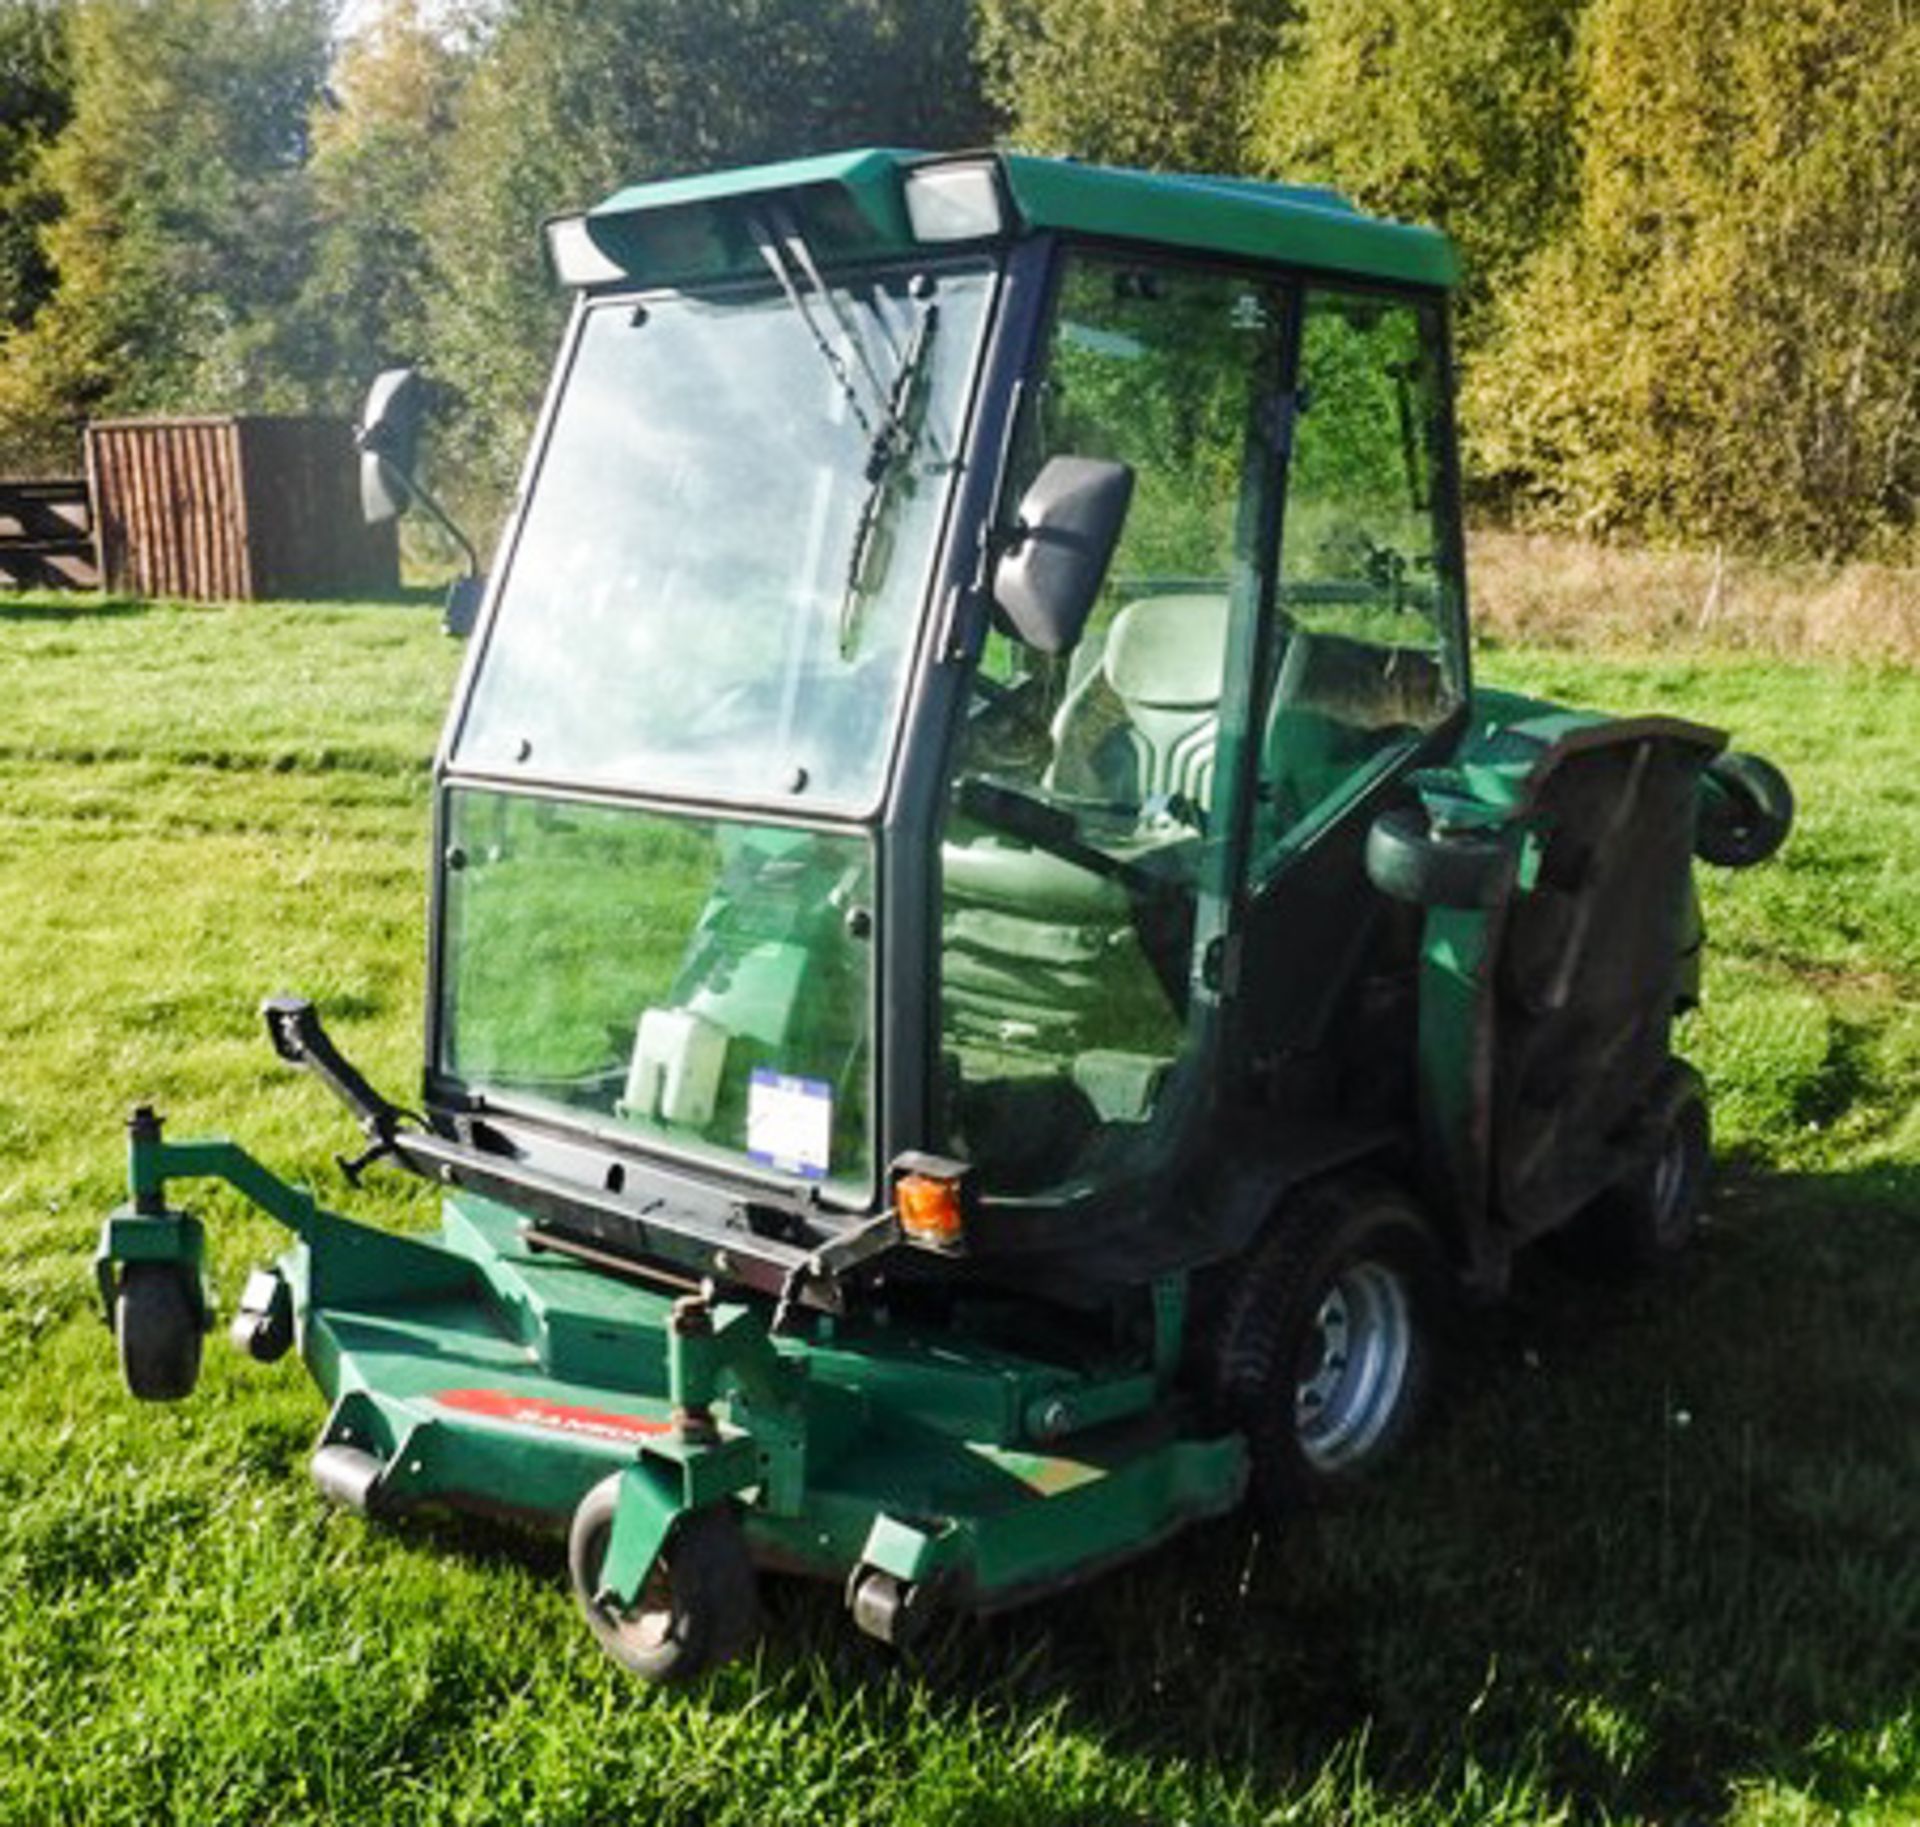 2006 RANSOME HF6010 BATWING ROTARY MOWER, CUTS APPROX 10FT 6INCHS, PERKINS 6 CYLINDER ENGINE, REG KX